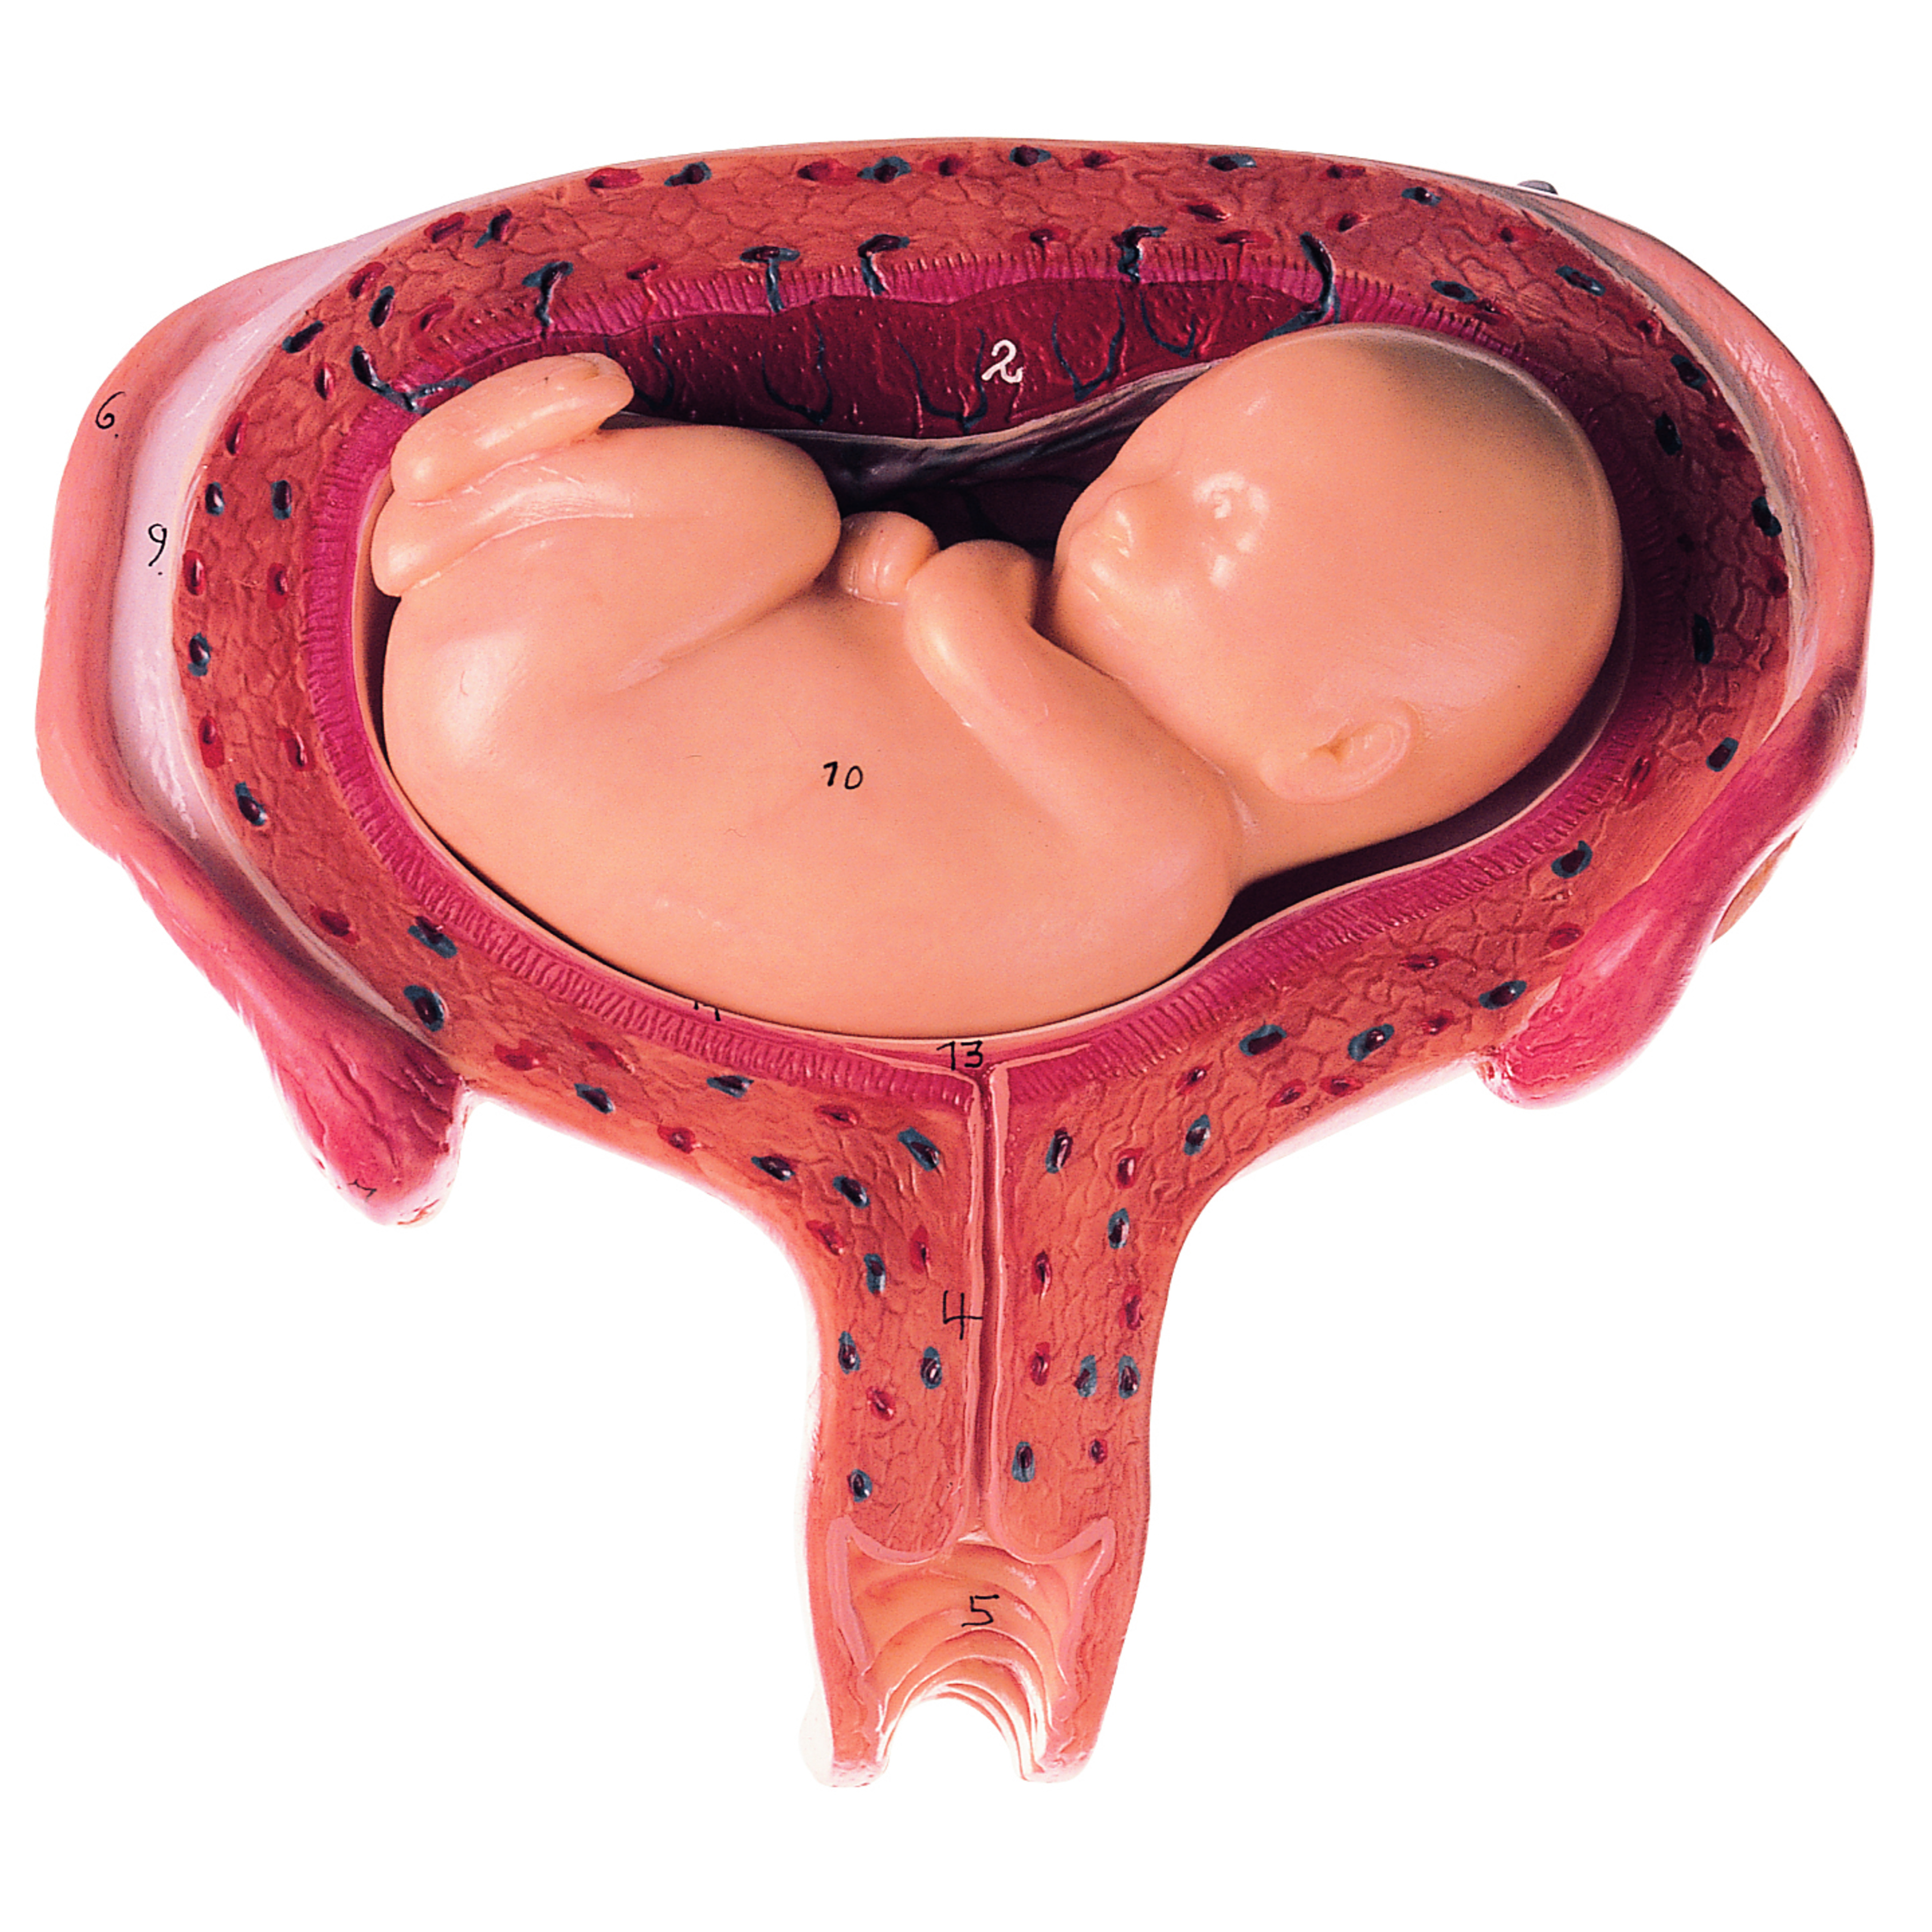 Uterus With Fetus in Fifth Month